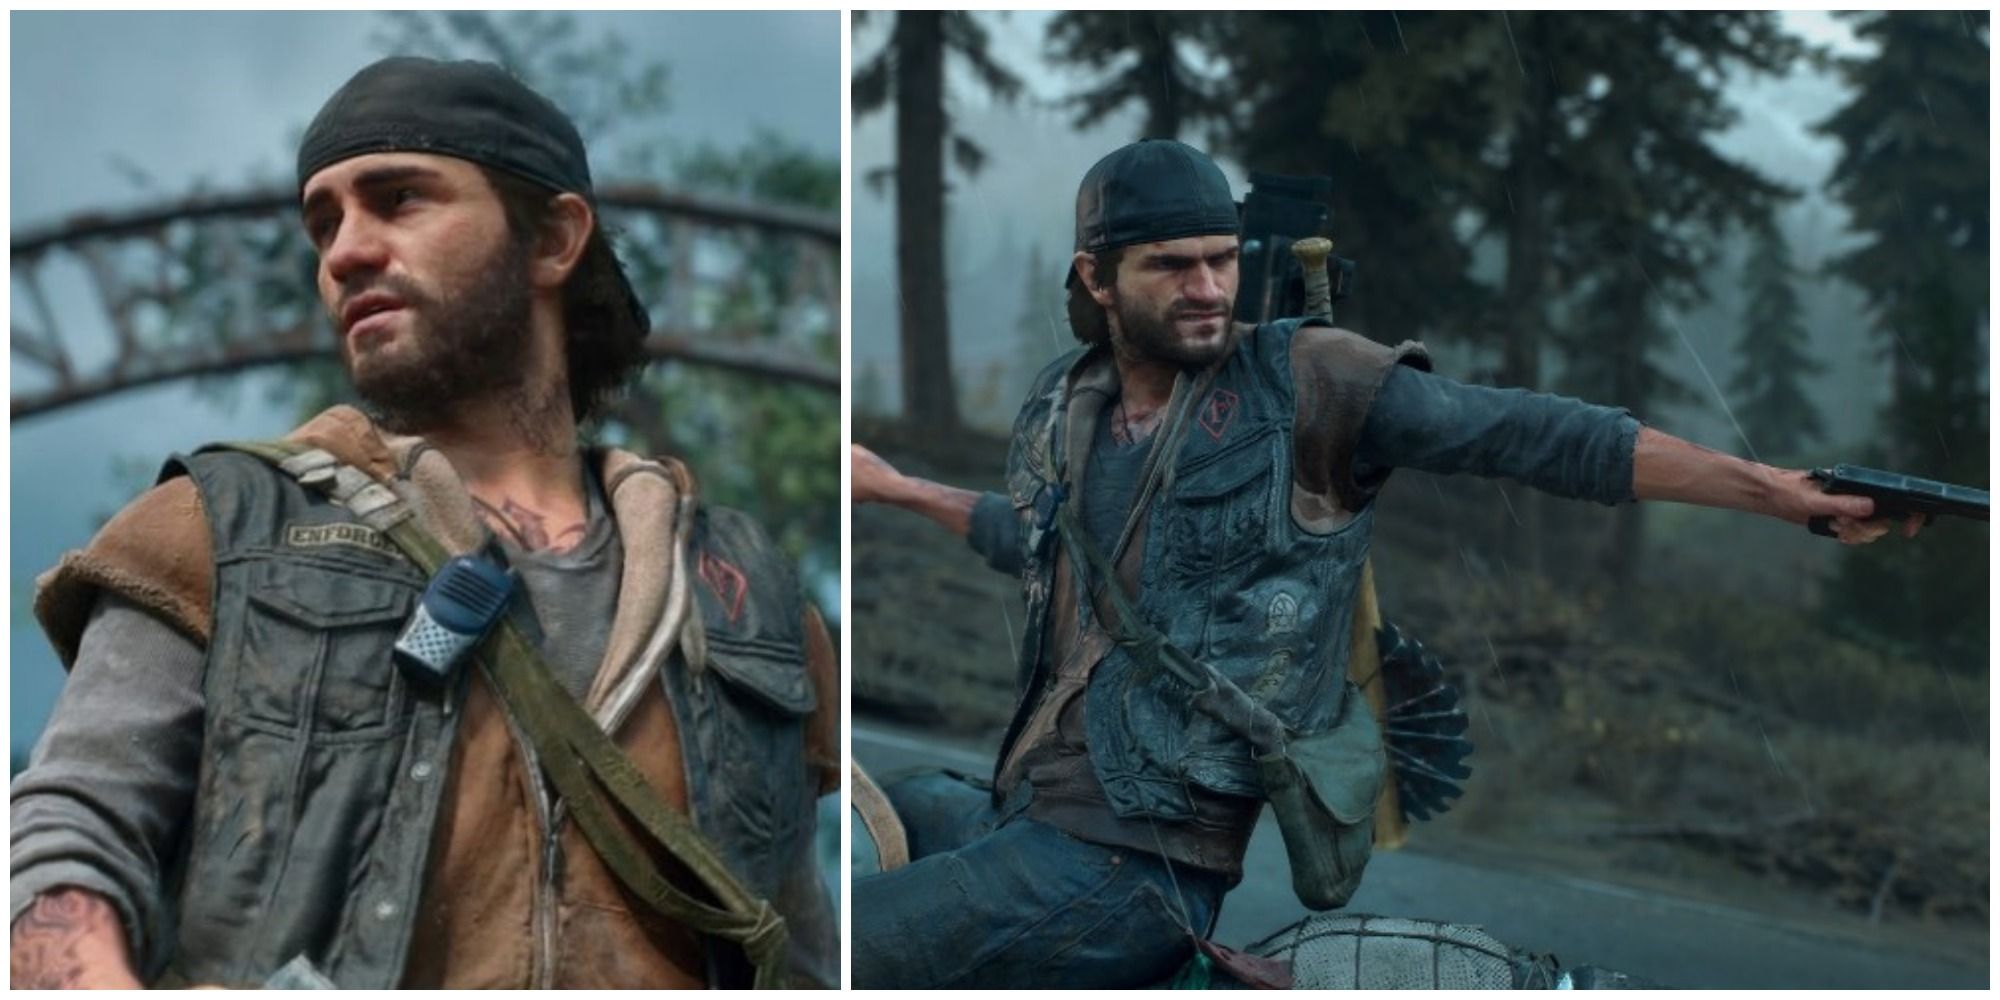 Days Gone What Happens If You Give Leons Stash To Copeland Or Tucker